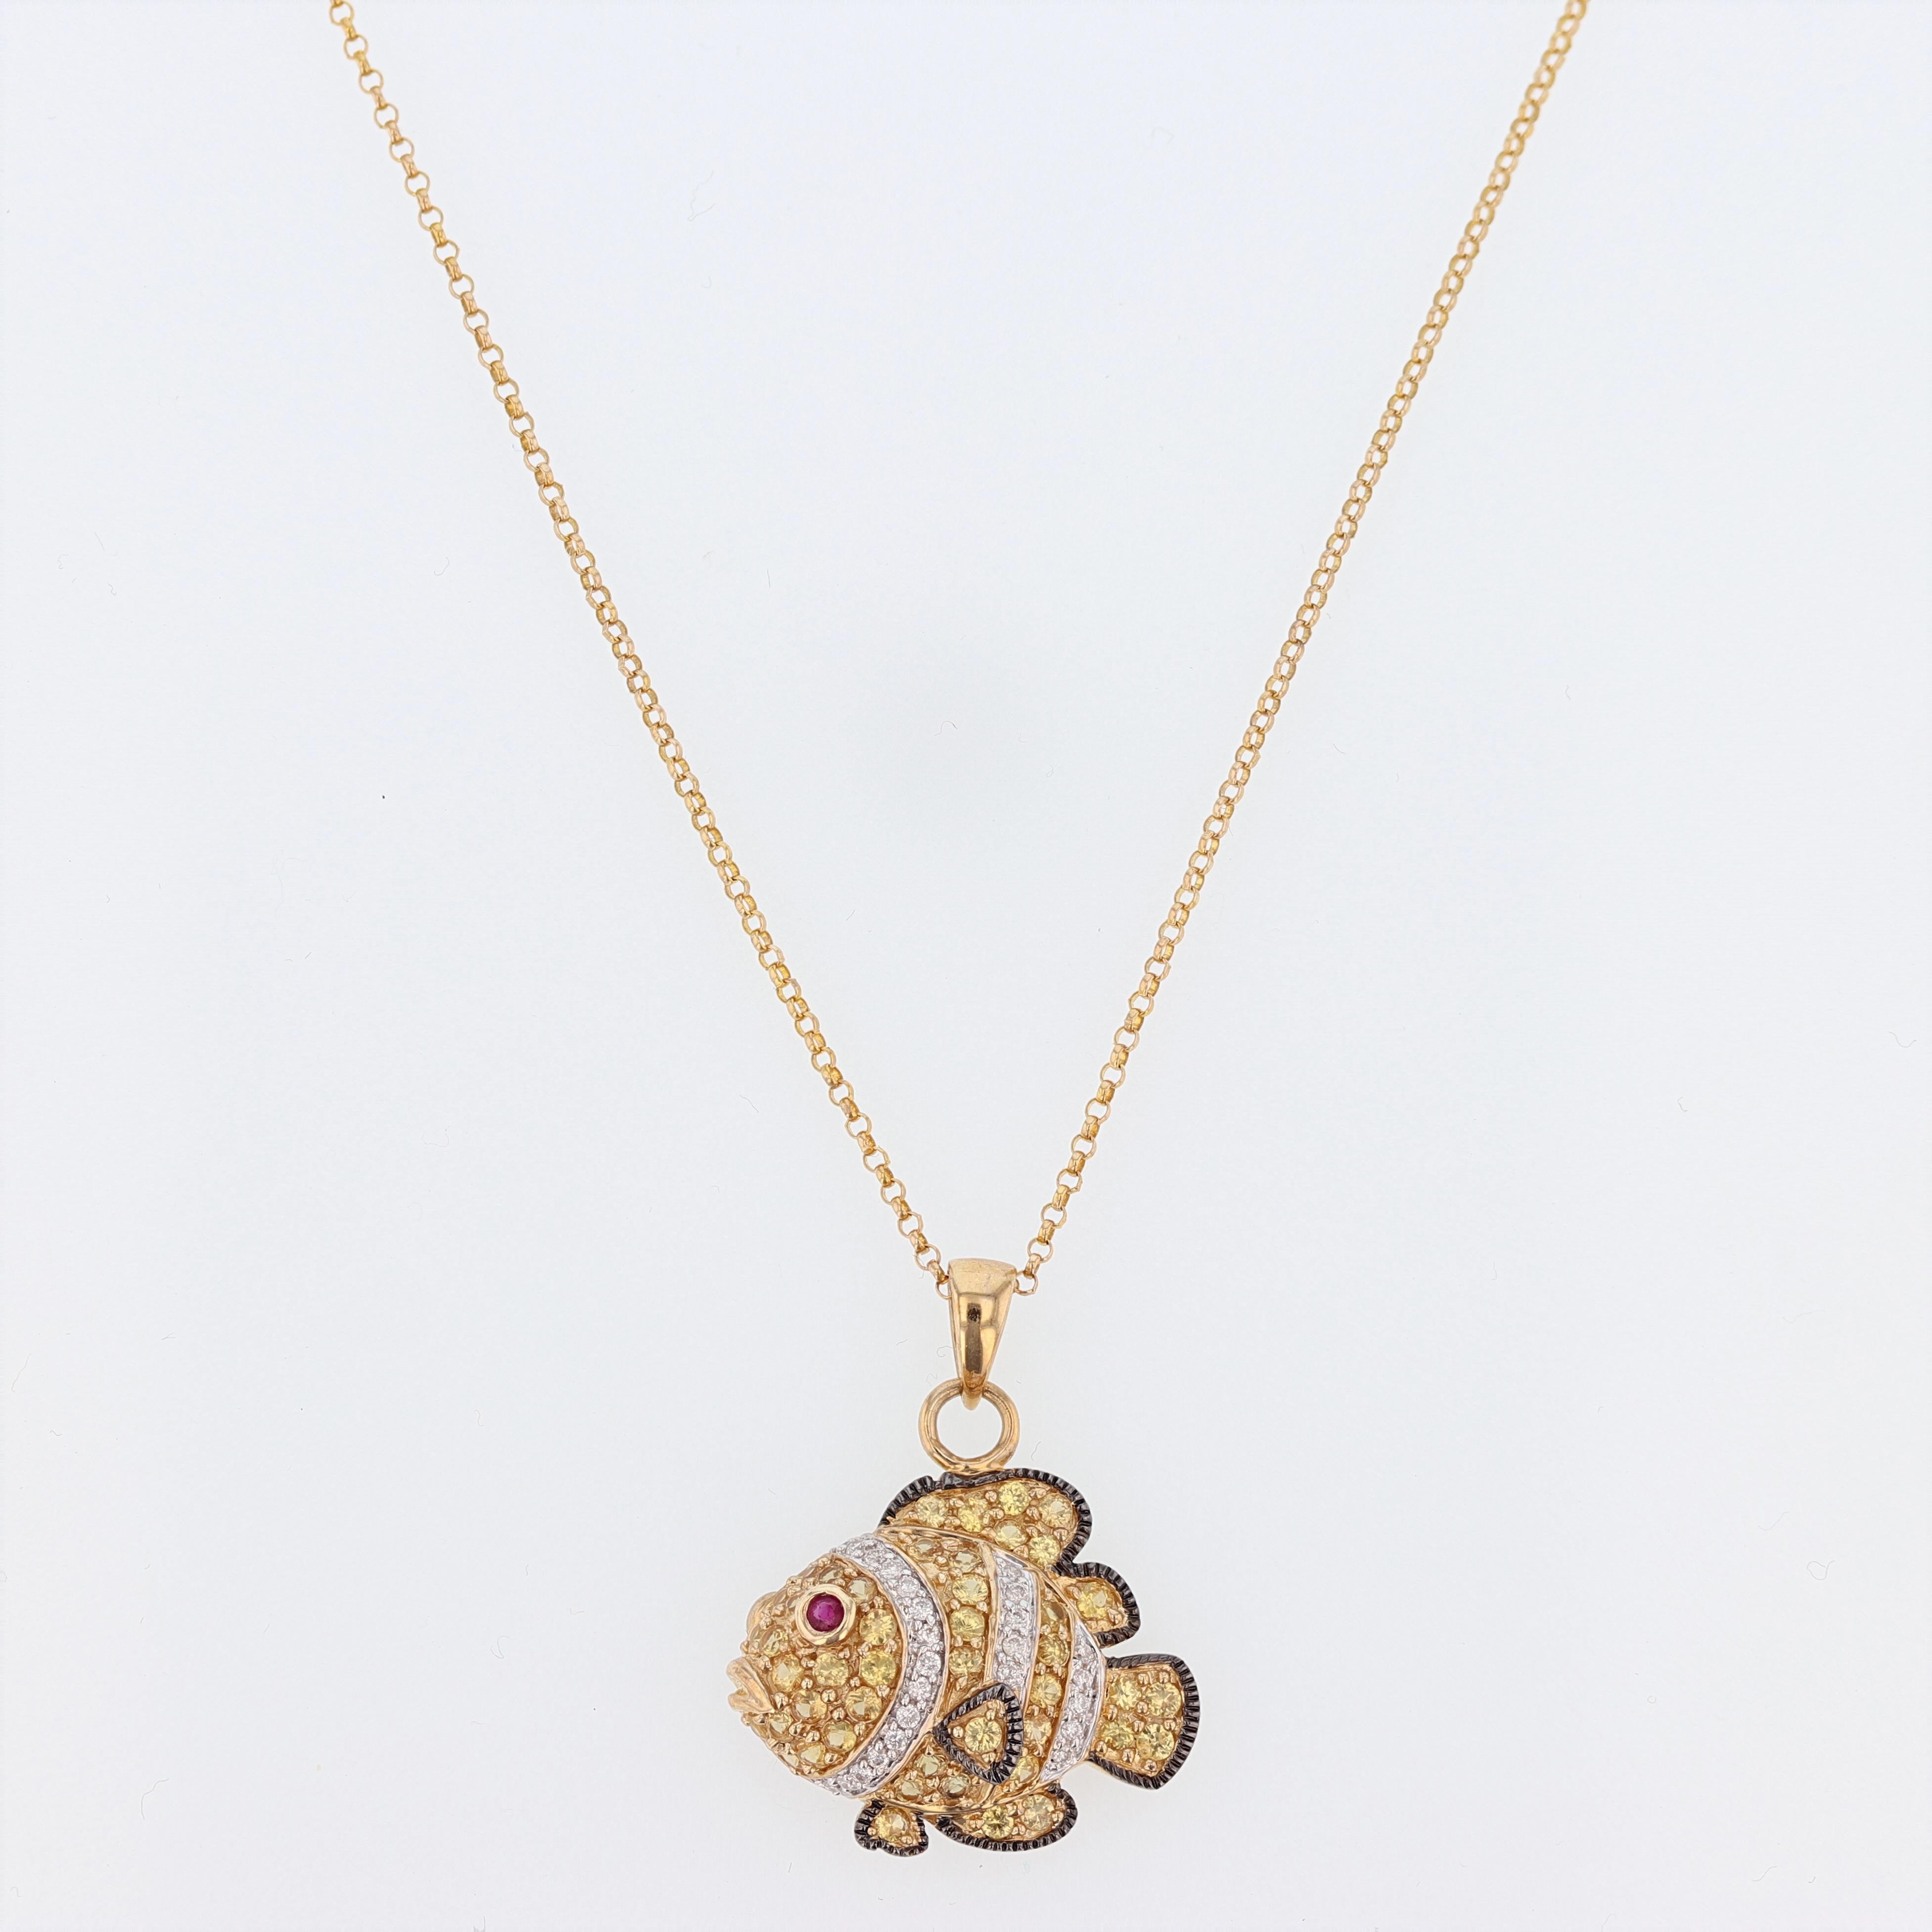 This clown fish pendant is made in 14k yellow gold with a black rhodium finish and features round yellow sapphires weighing 1.10ct prong set. The pendant necklace also features round cut diamonds prong set weighing 0.13ct color grade (I) clarity